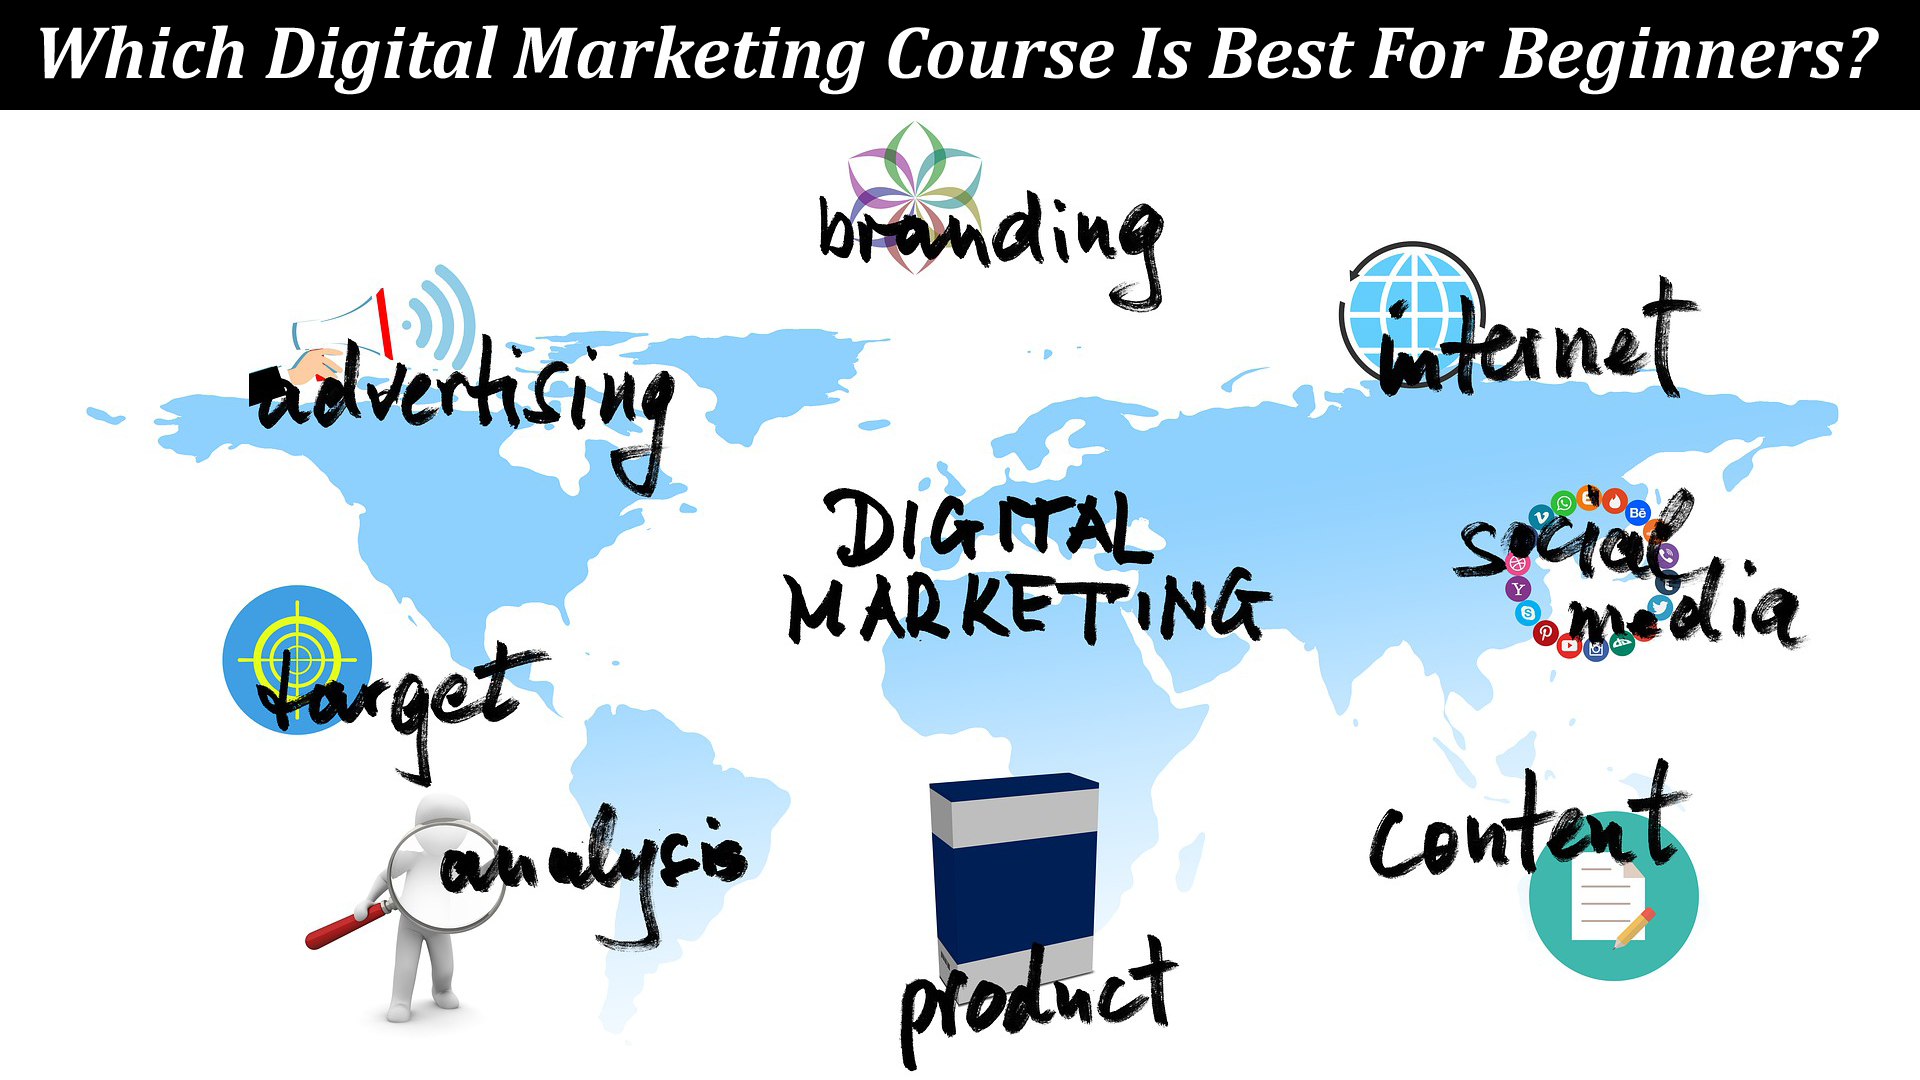 Which digital marketing course is best for beginners?